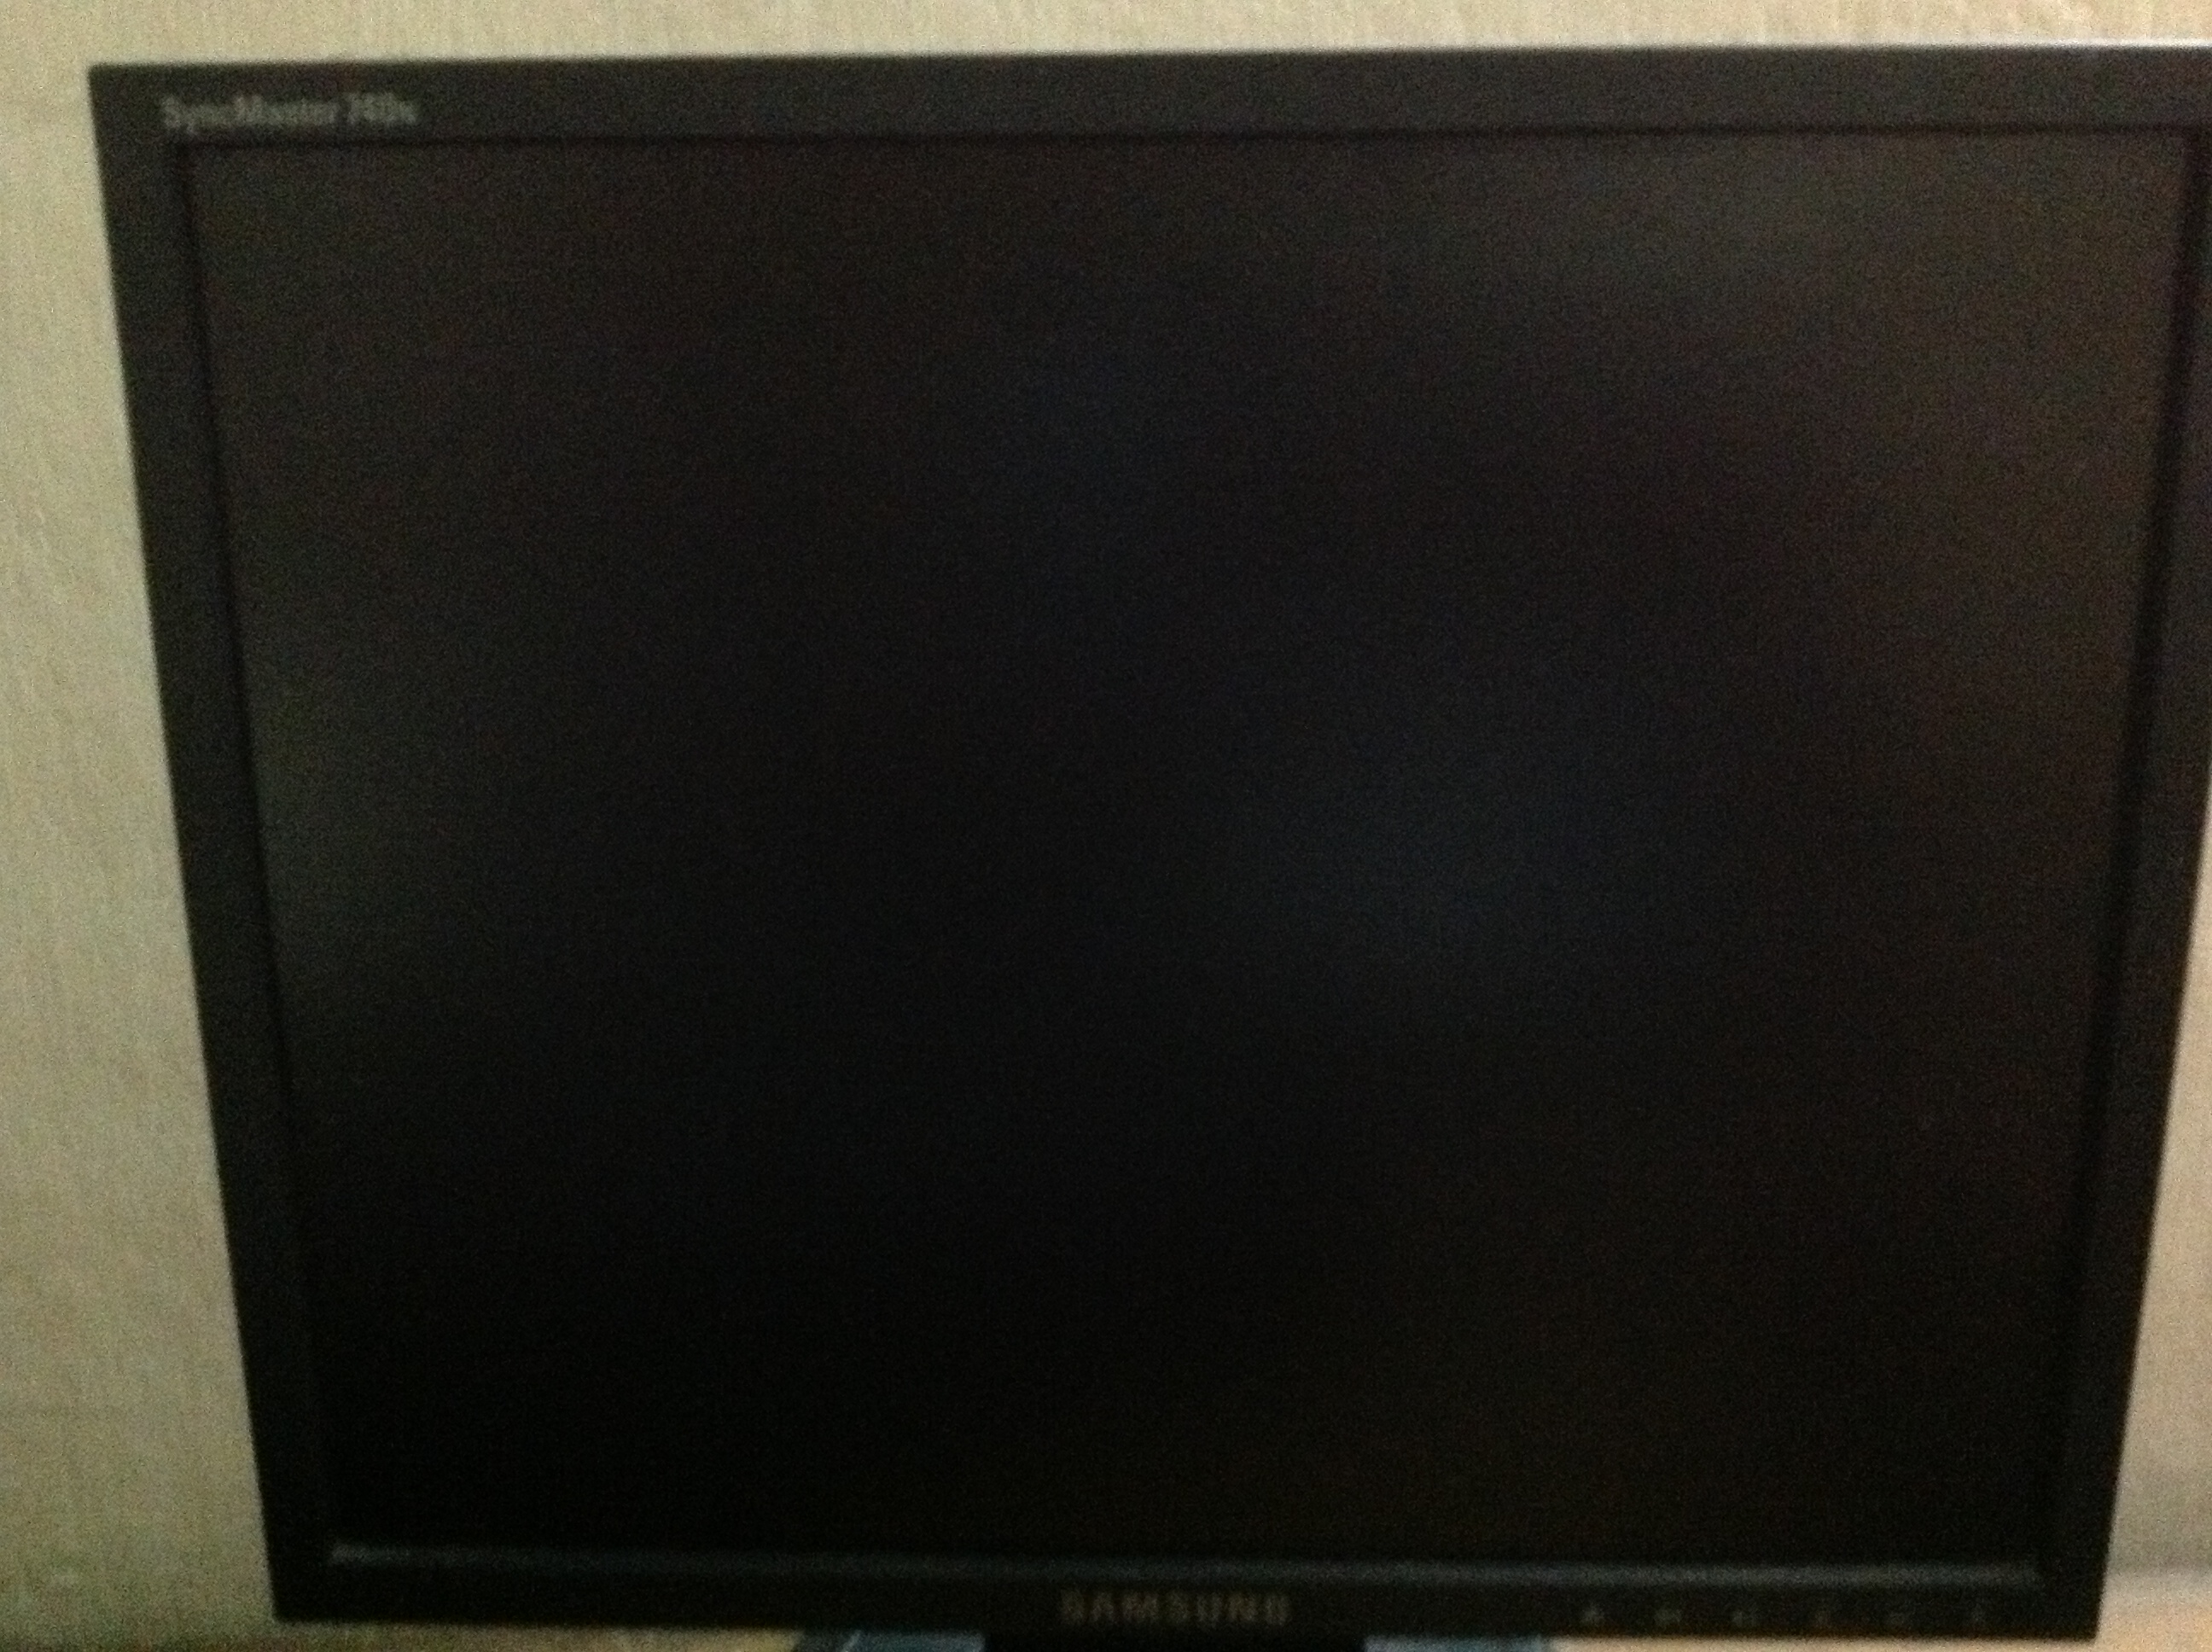 Samsung lcd 17 inch large image 0